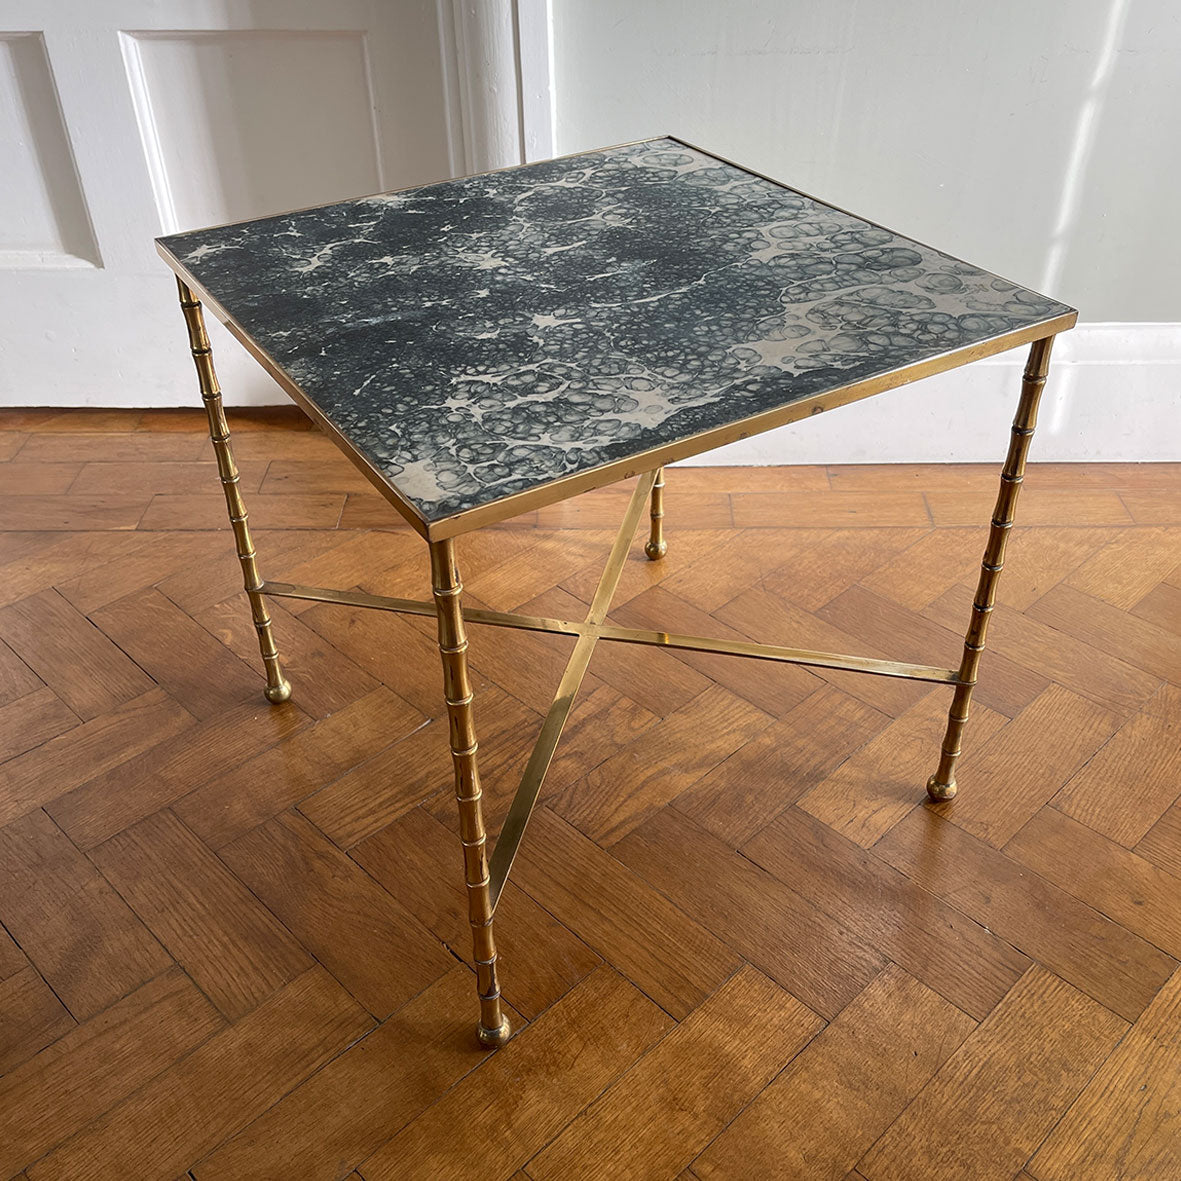 A super smart, gilded brass, Hollywood Regency style lounge side table. Faux Bamboo design to the legs held sturdy by a brass cross stretcher. The brass lipped top sees a beautiful faux marble style laminate. Tres chic! - SHOP NOW - www.intovintage.co.uk